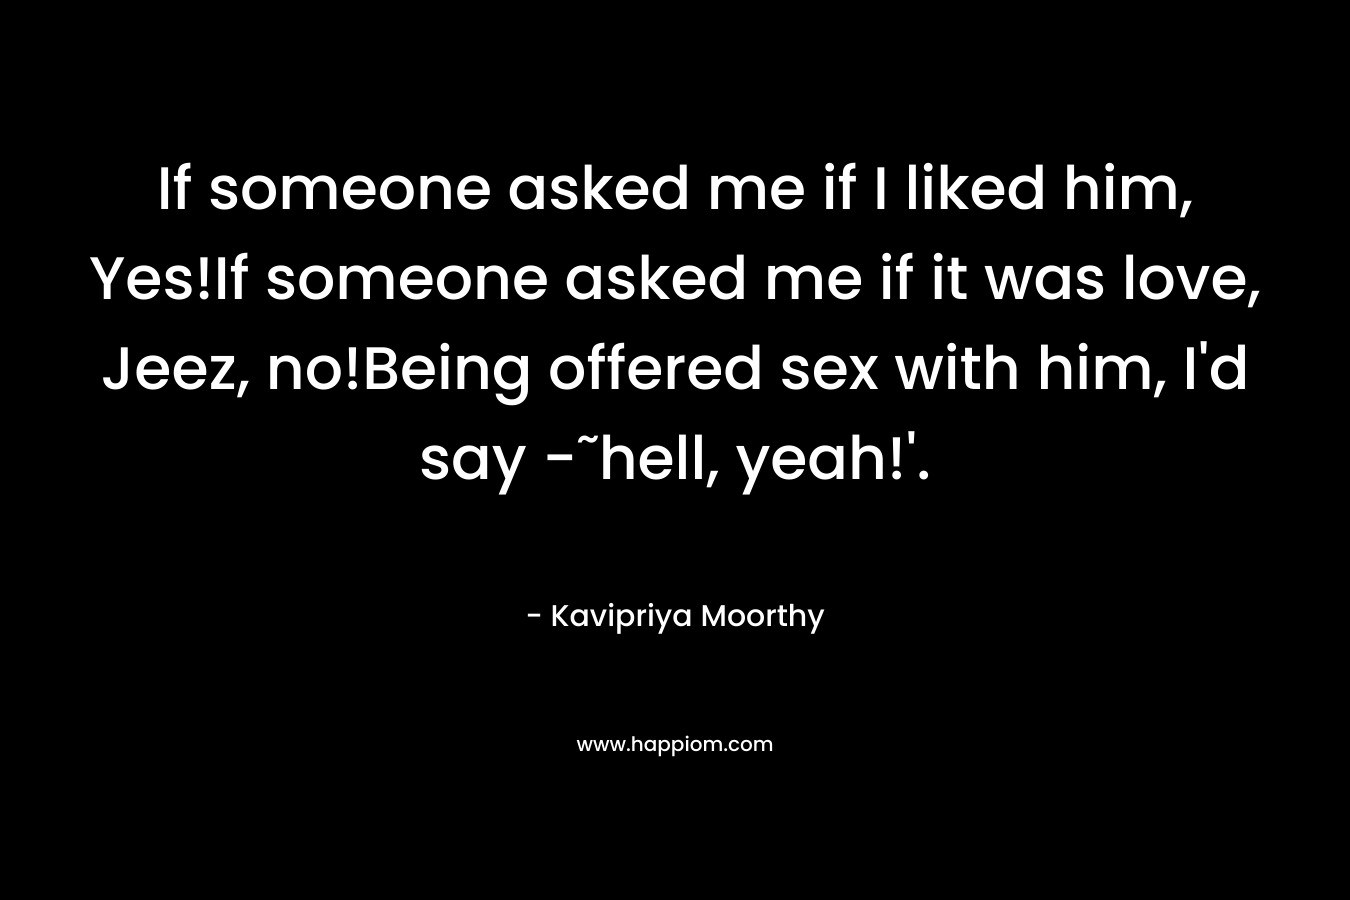 If someone asked me if I liked him, Yes!If someone asked me if it was love, Jeez, no!Being offered sex with him, I’d say -˜hell, yeah!’. – Kavipriya Moorthy